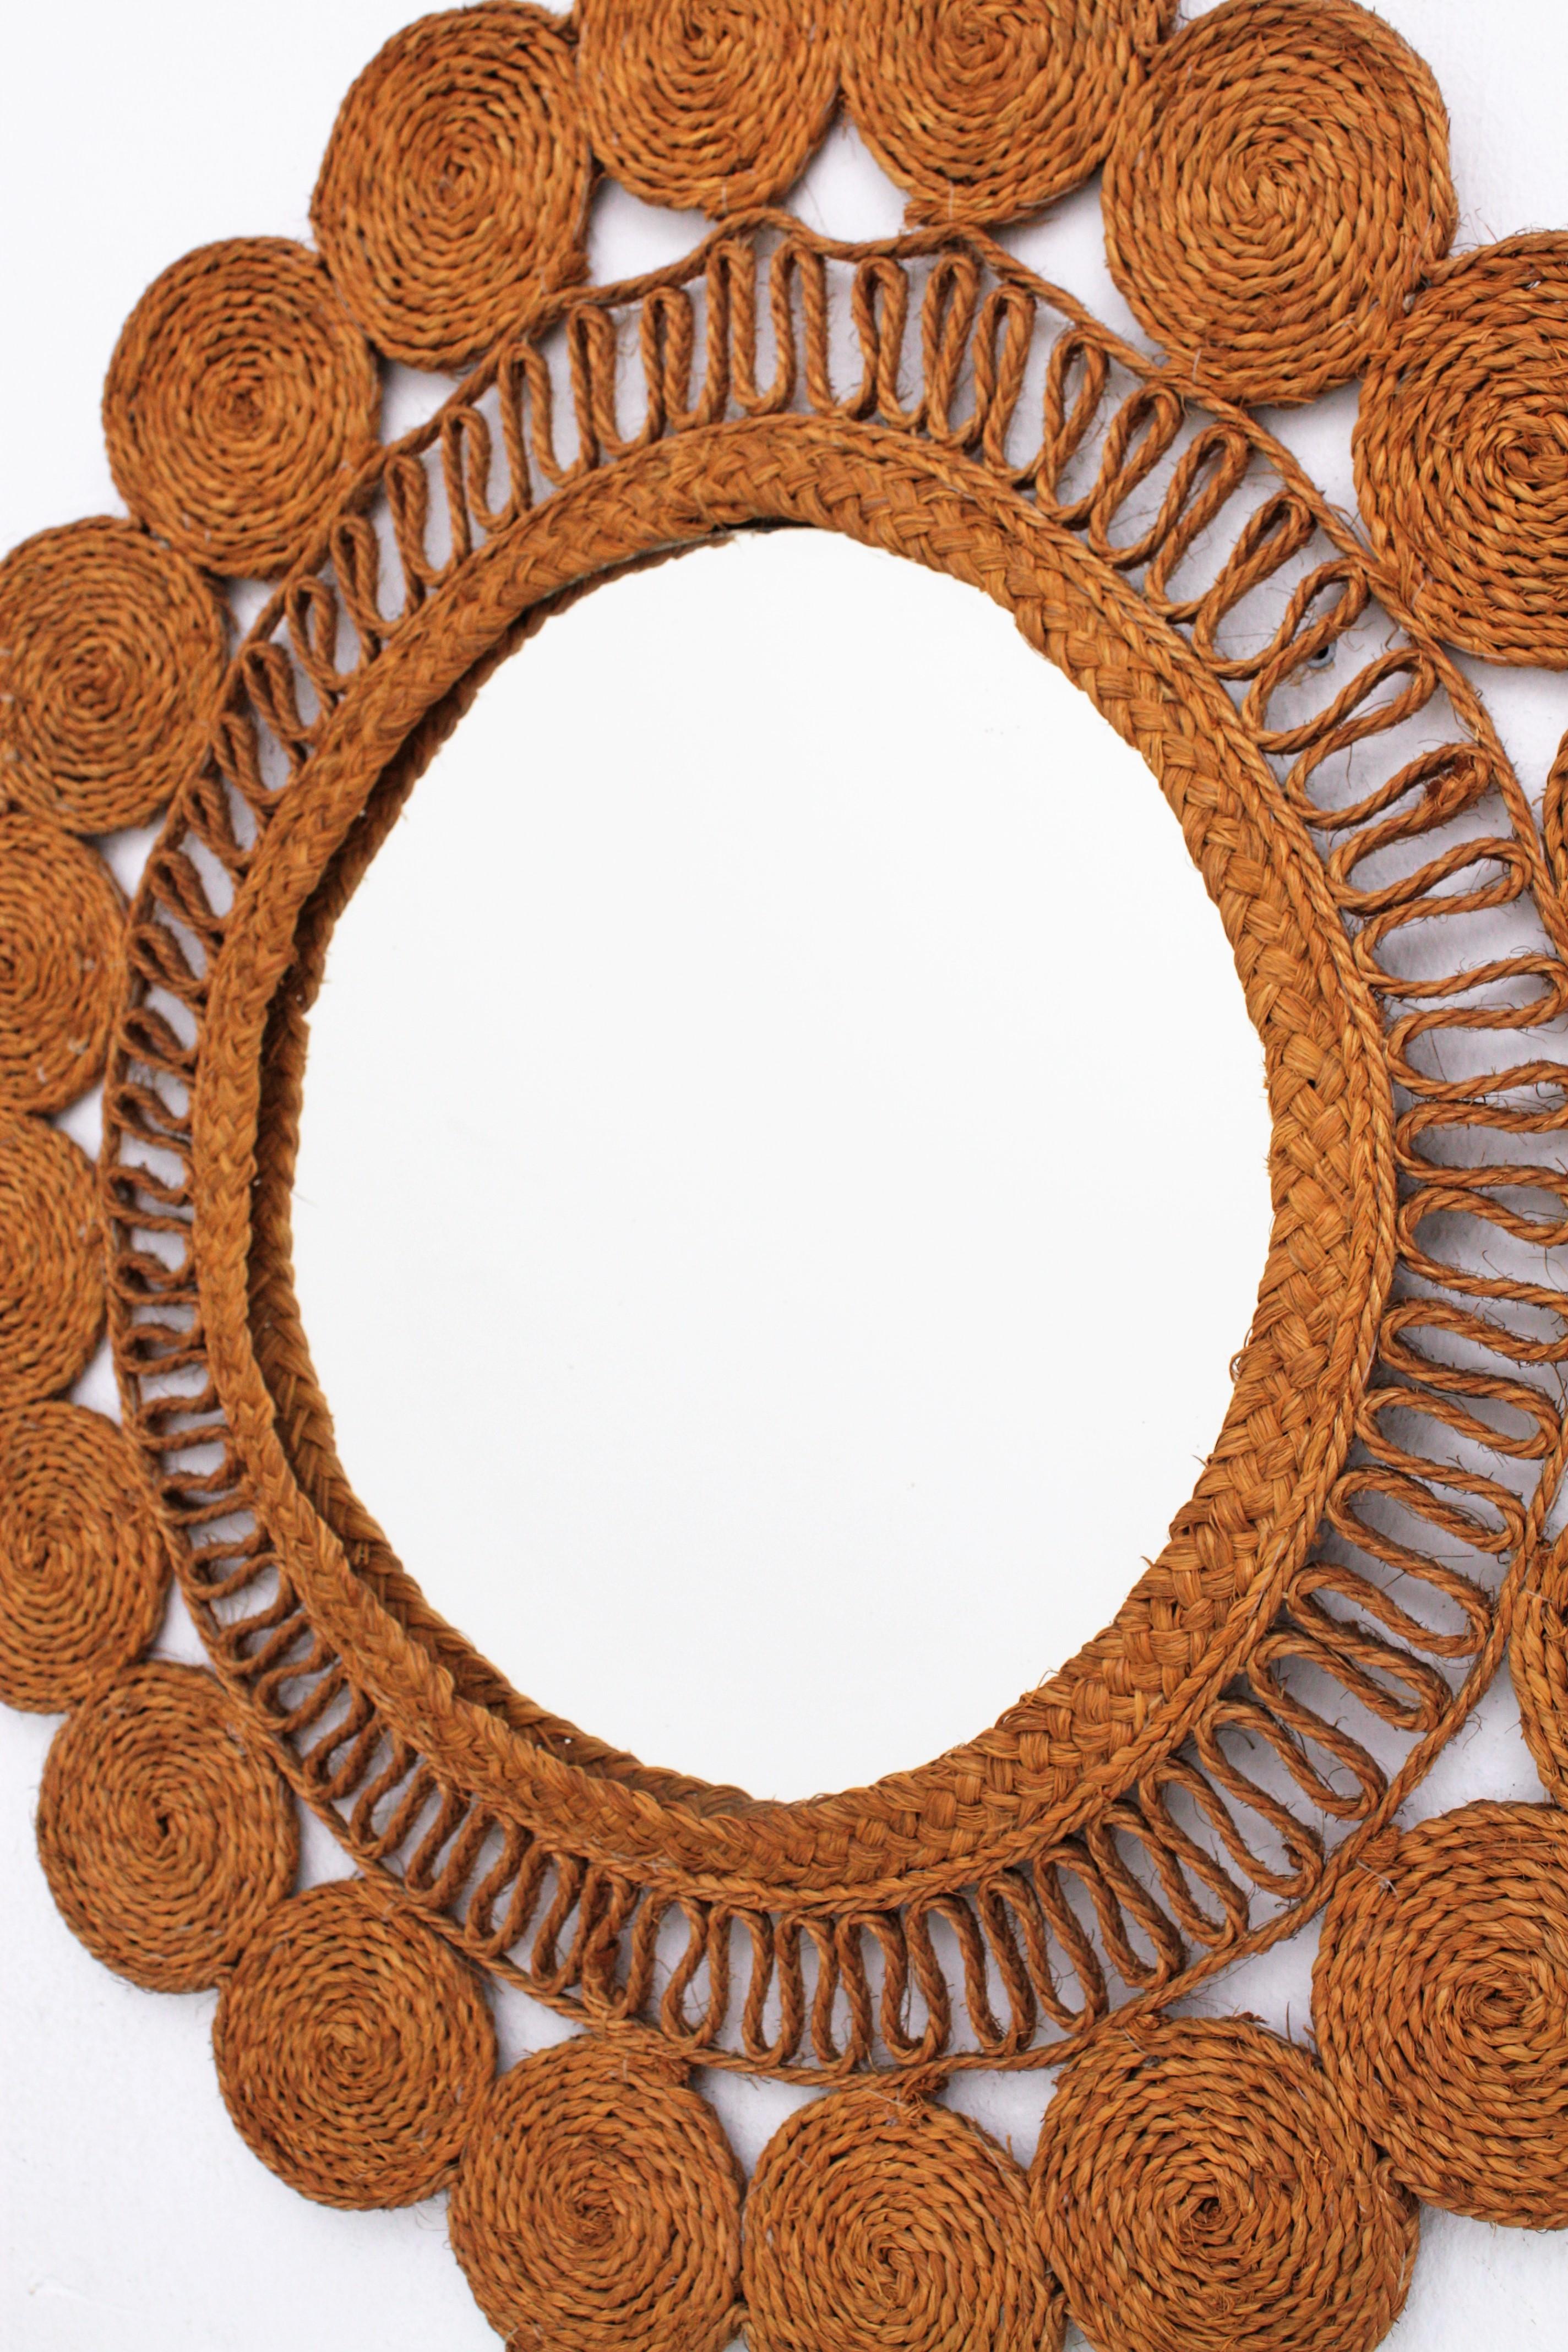 Rustic Woven Esparto Rope Wall Mirror, Spain, 1960s For Sale